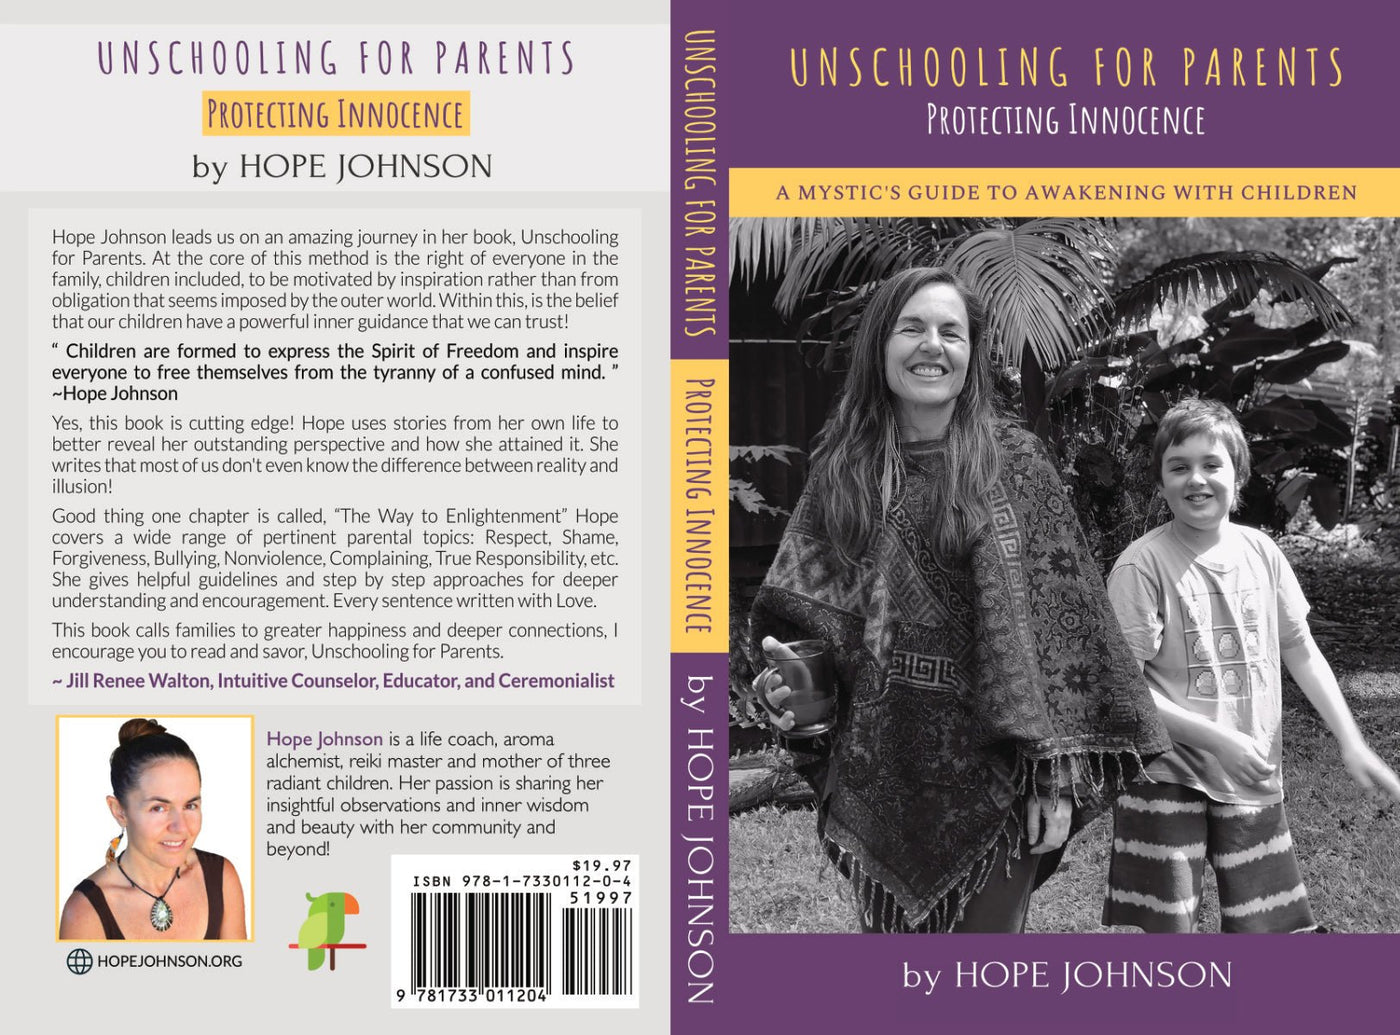 Unschooling For Parents - A Mystic's Guide to Awakening with Children - Autographed Book by Hope Johnson - Miracle Botanicals Essential Oils